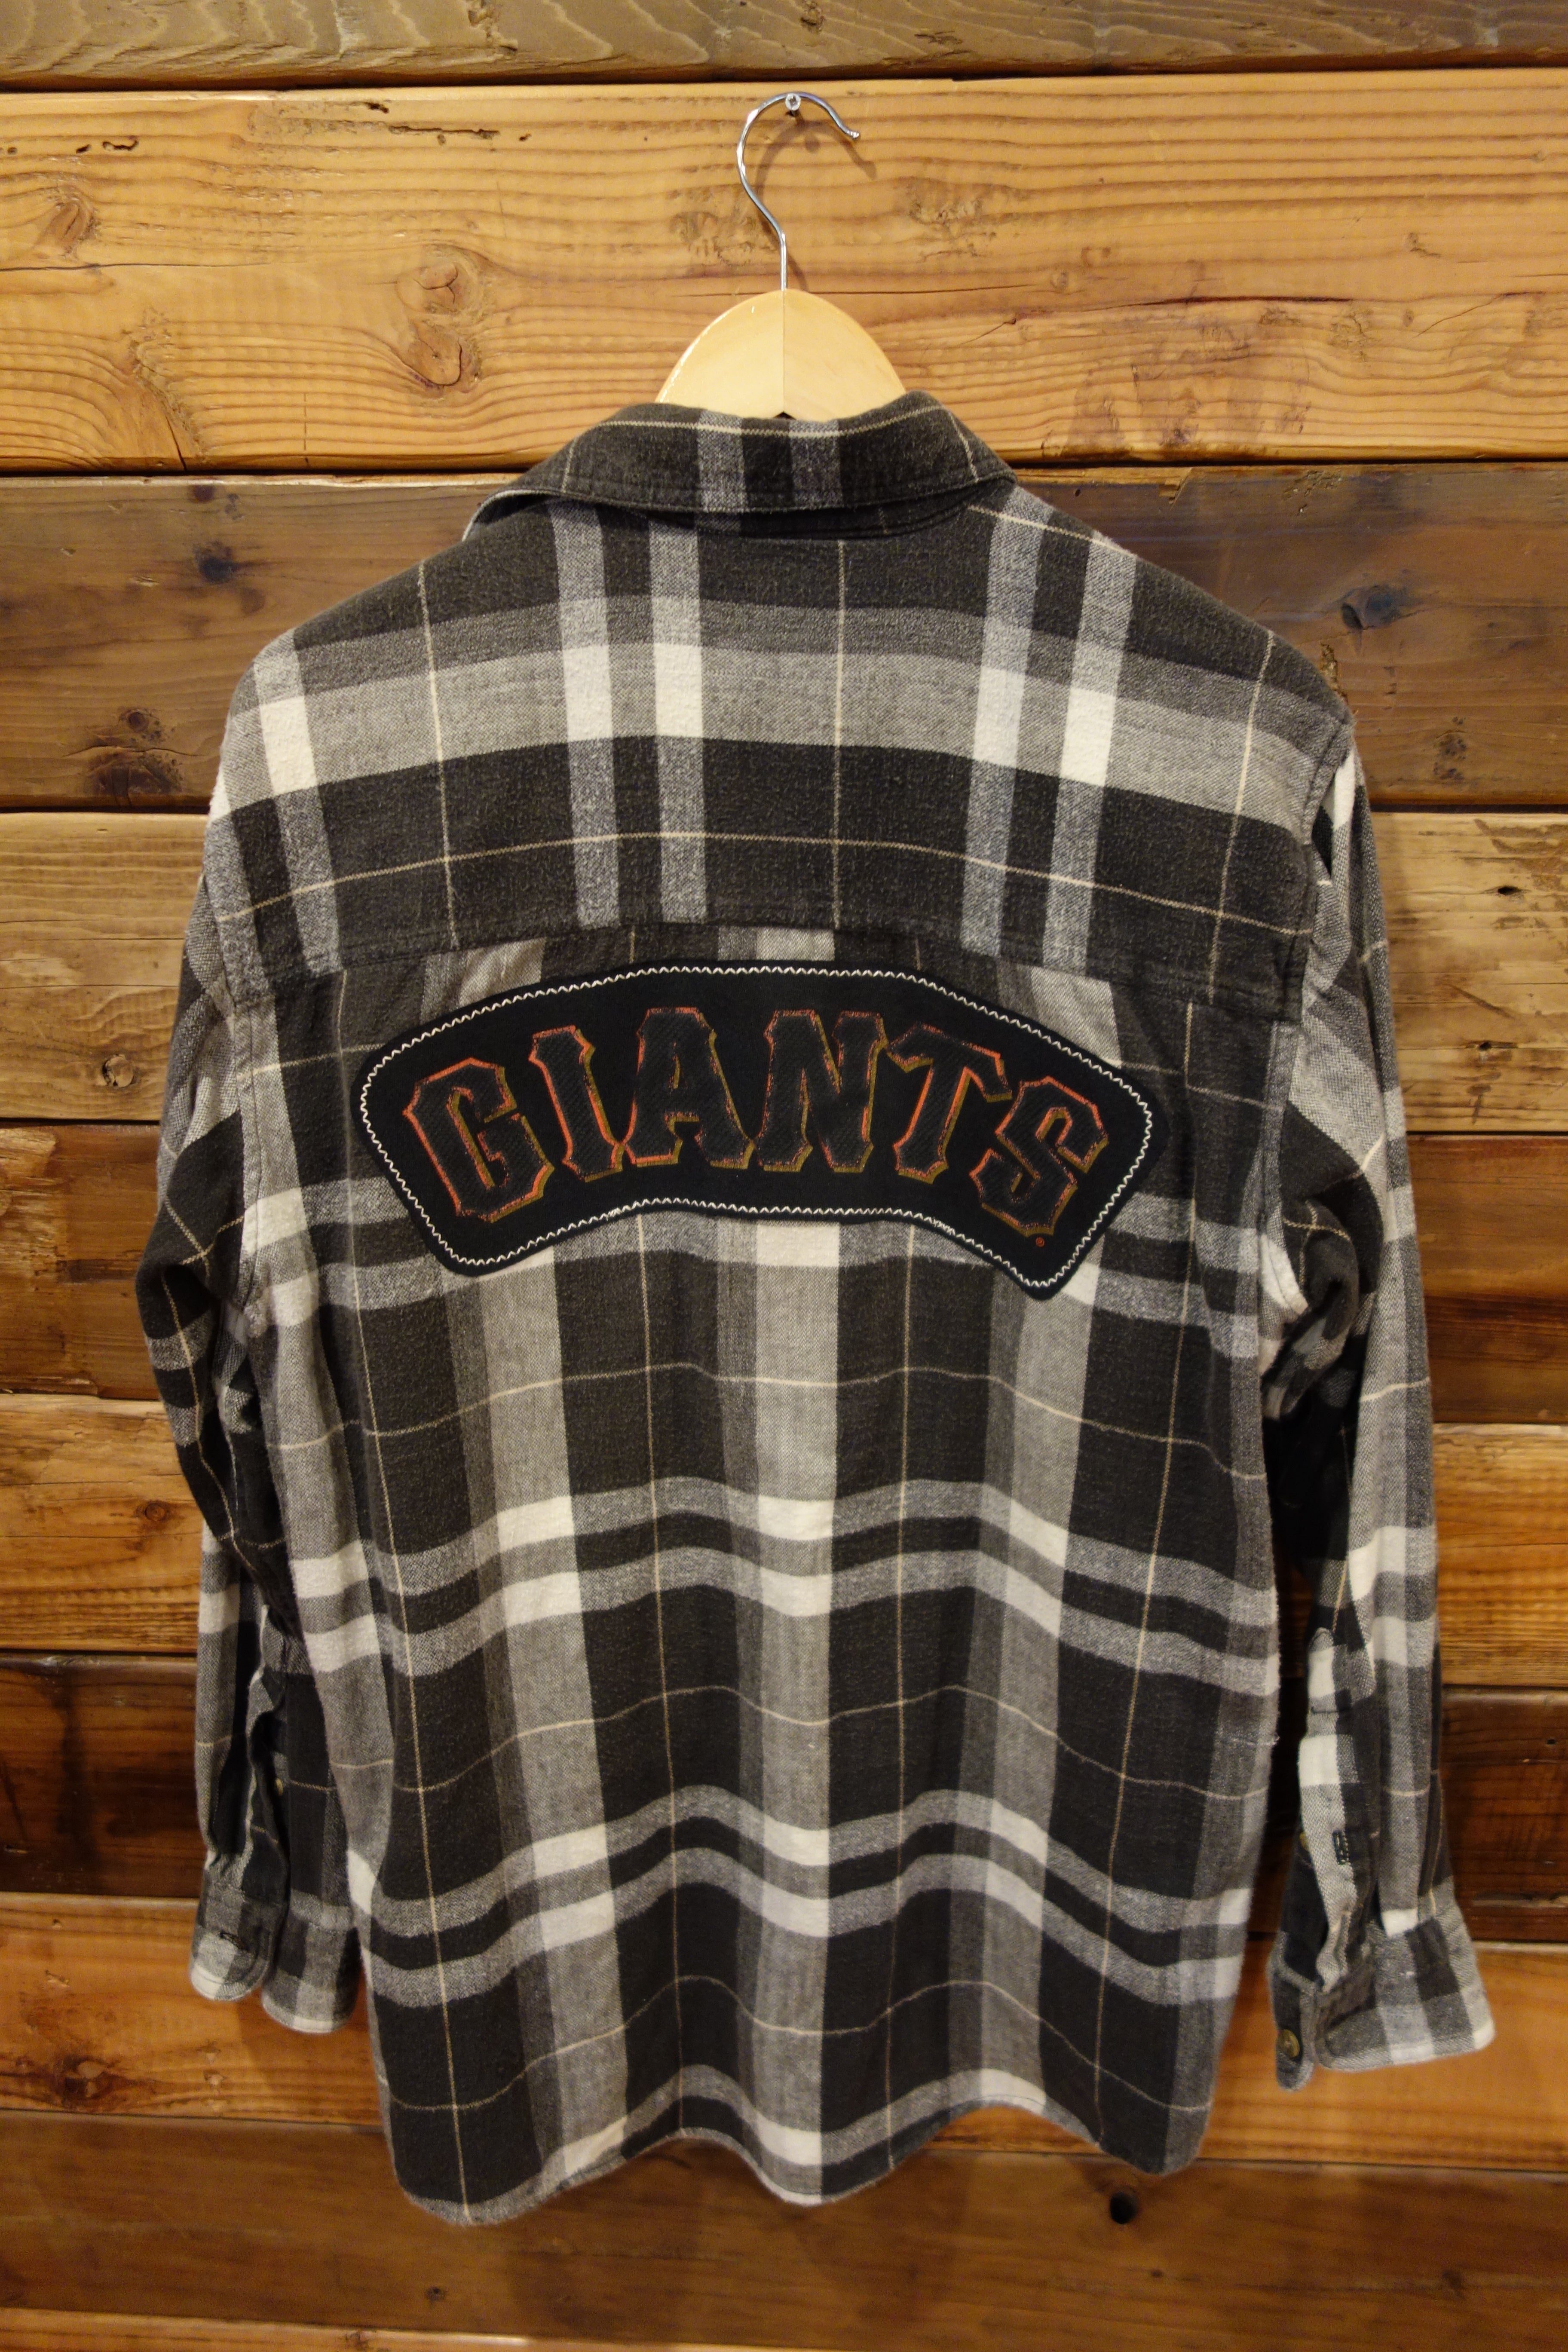 Ruff Hewn, Vintage one of a kind flannel, San Francisco Giants 